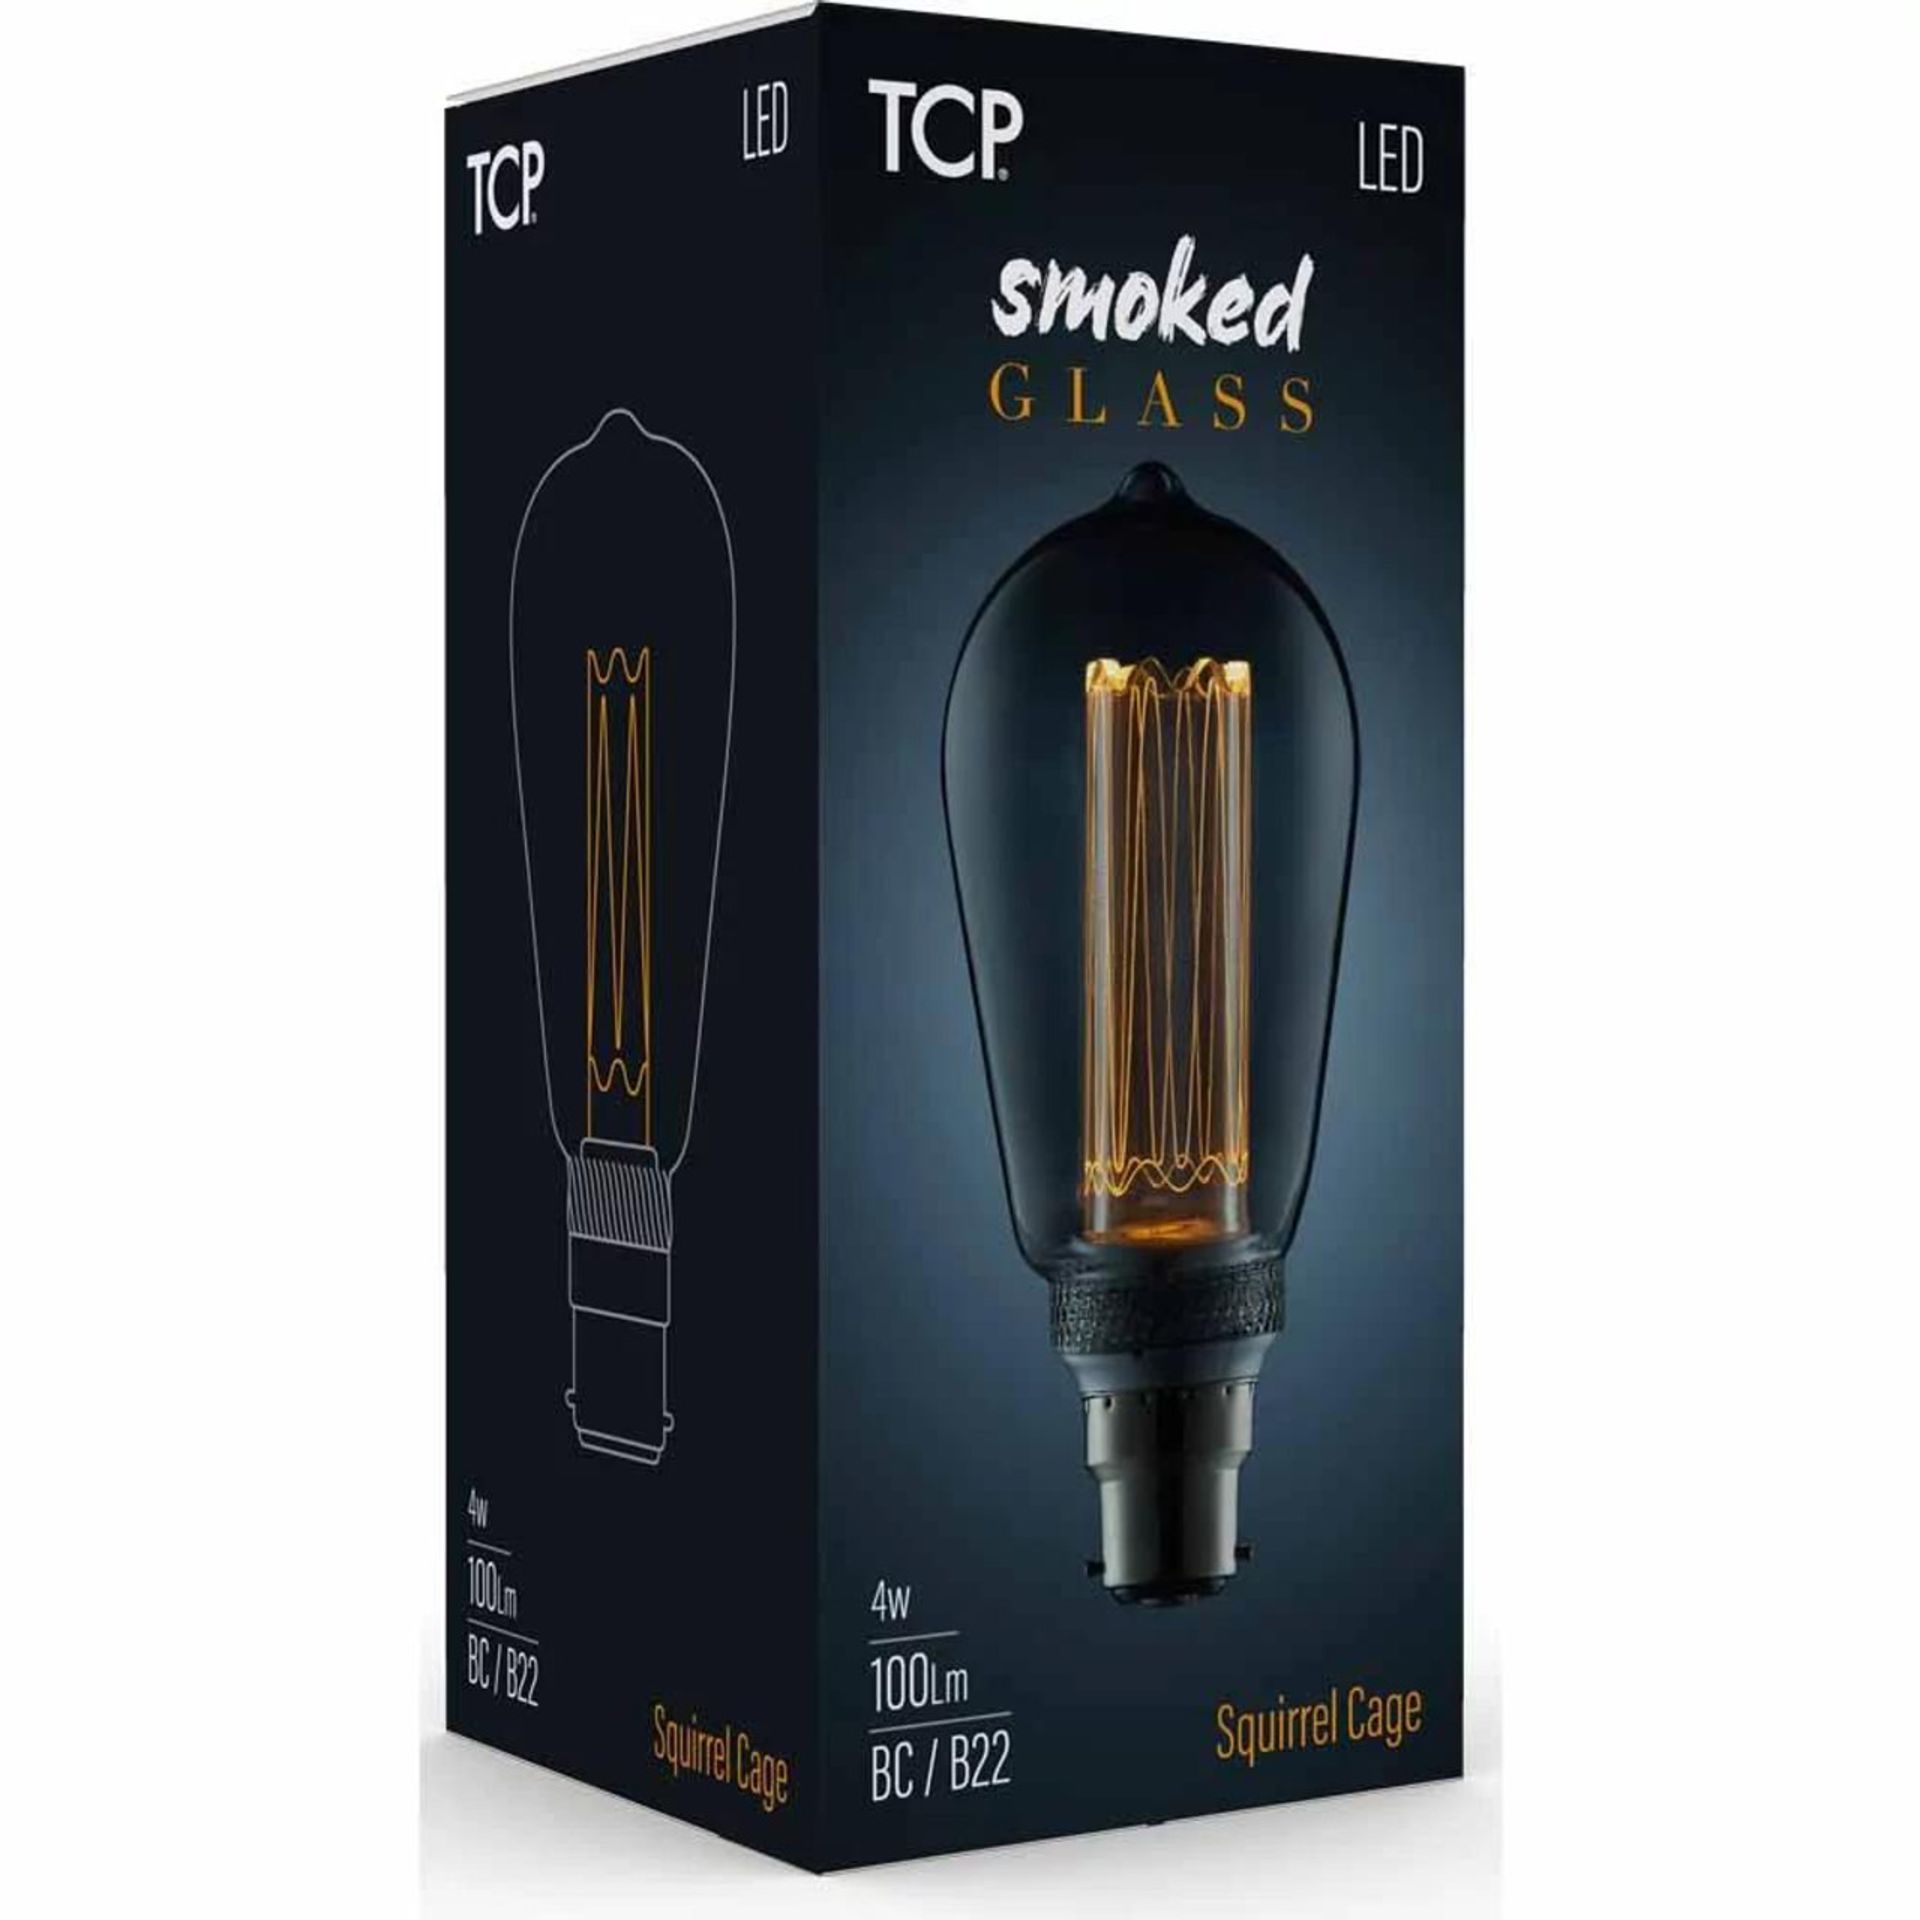 50 x Brand New TCP Decorative LED 100L ST64 4W B22/BC Non Dimmable 2000 Kelvin,Smoked Glass rrp £